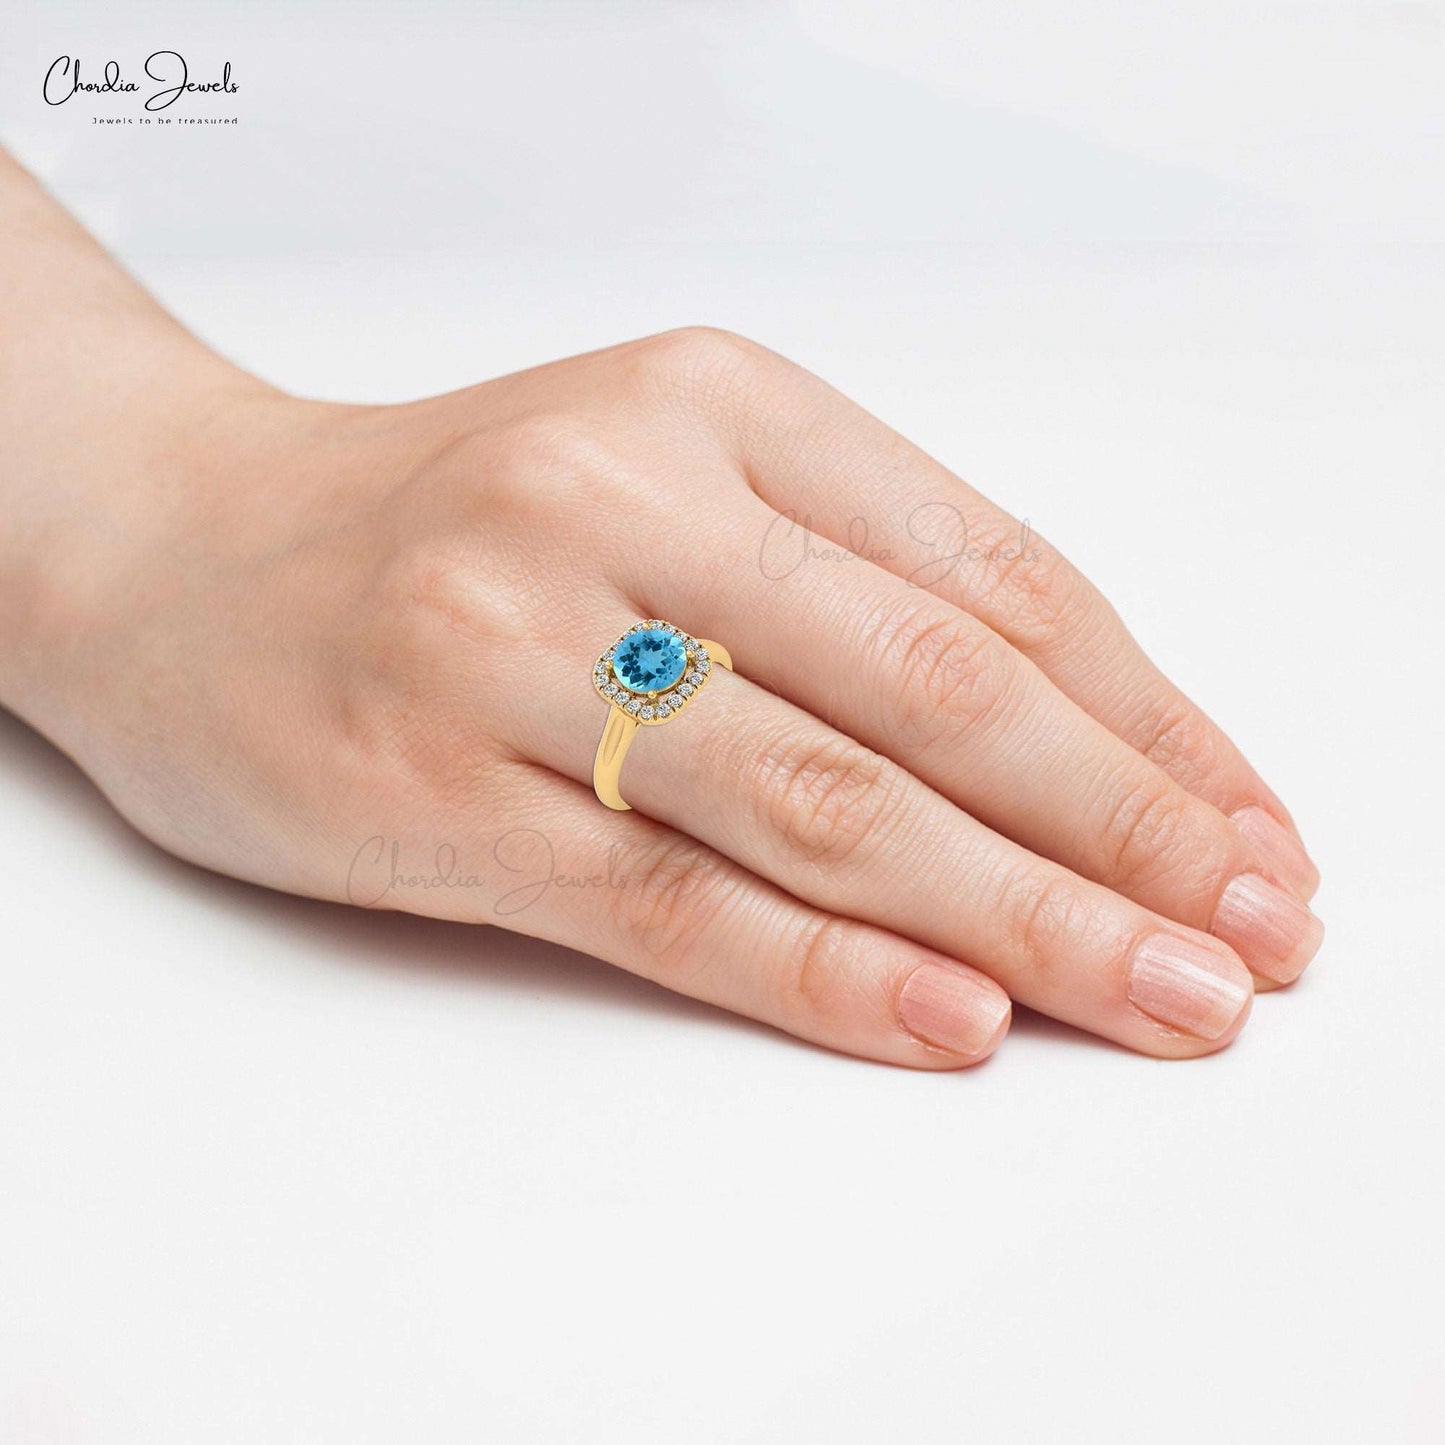 Load image into Gallery viewer, 14k Solid Gold Natural Gemstone and Diamond Halo Ring, 6mm Round Cut Swiss Blue Topaz Dainty Ring For Wedding Gift
